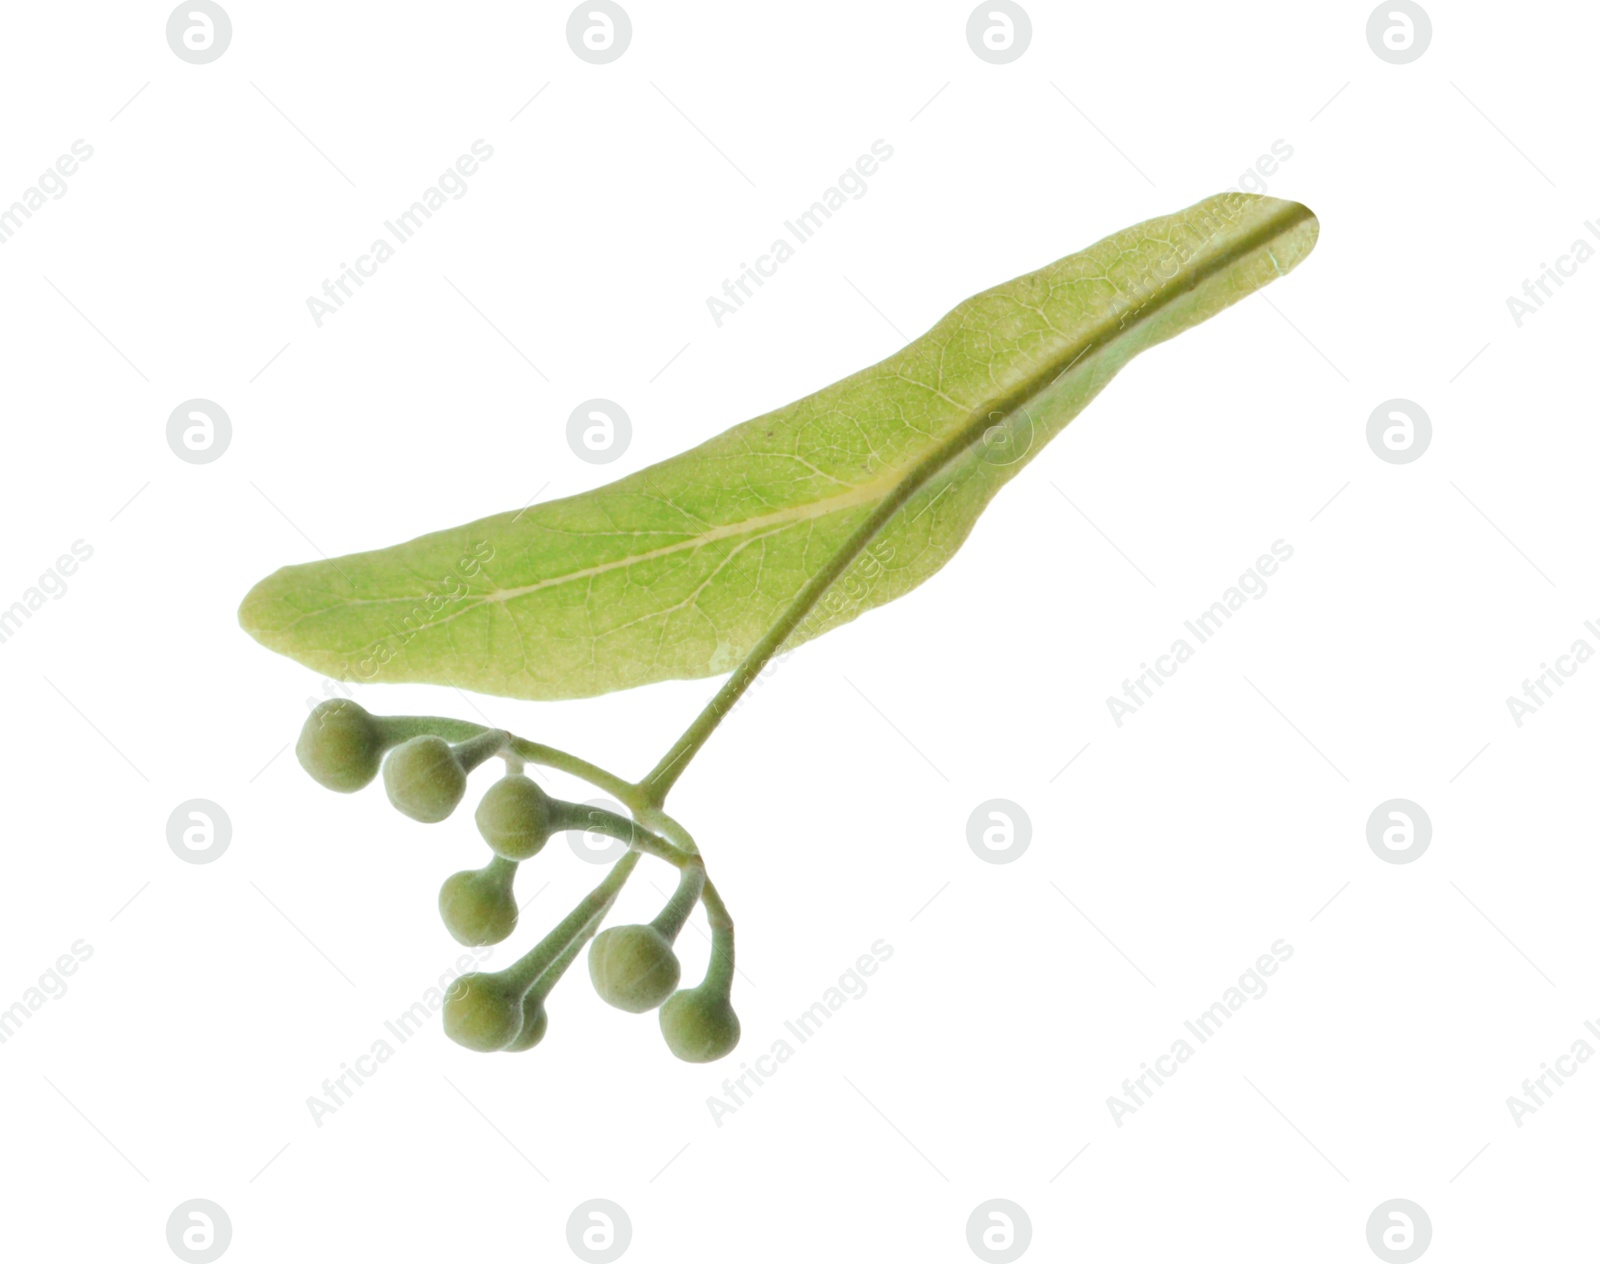 Photo of Twig with linden flower buds and leaf isolated on white